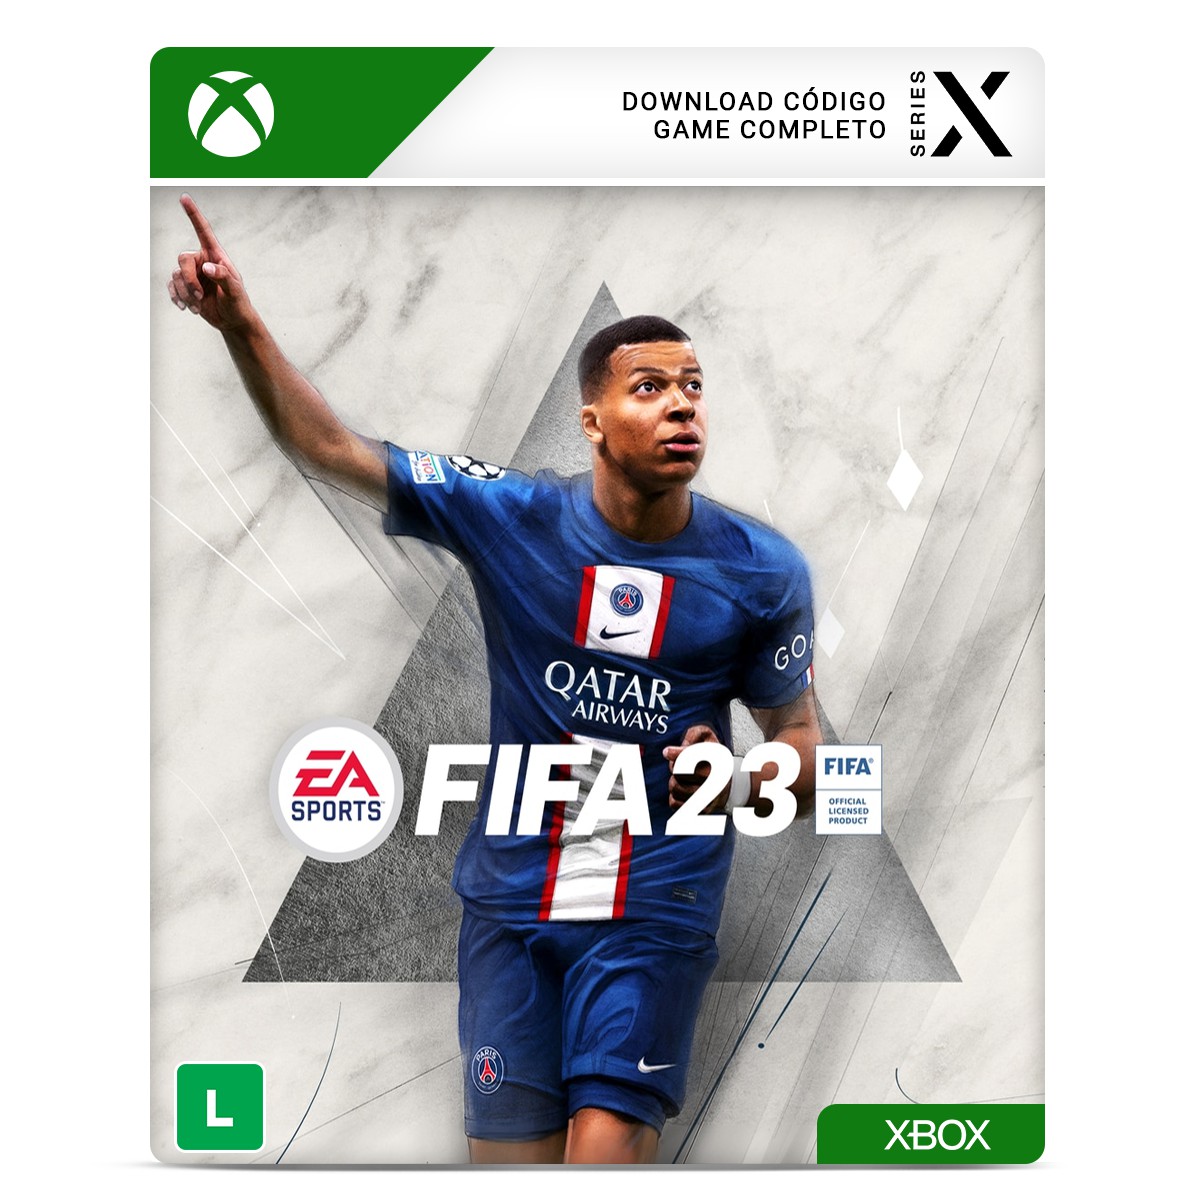 Theo on X: FIFA 23 standard edition on offer at $17 for ps4 and